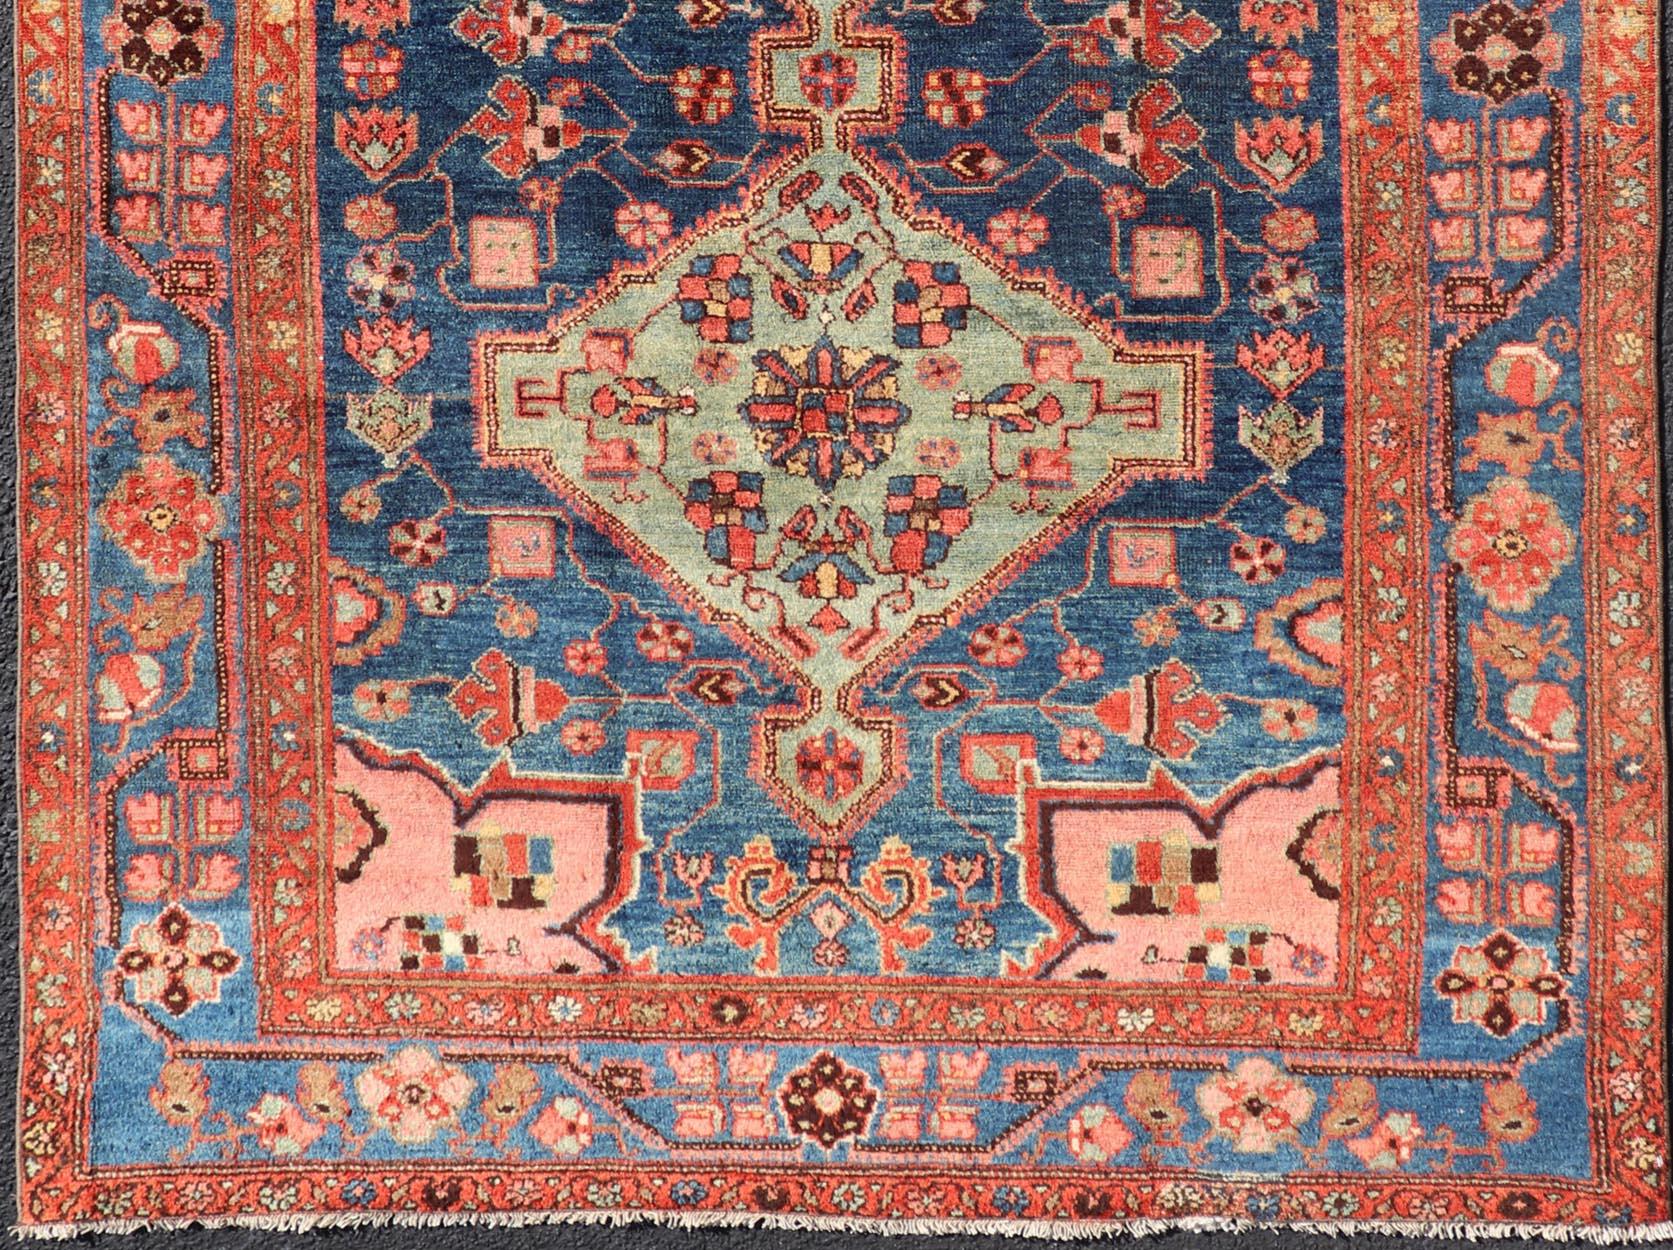 20th Century Antique Persian Karajeh Rug with Geometric Medallions in Green, Blue, and Red